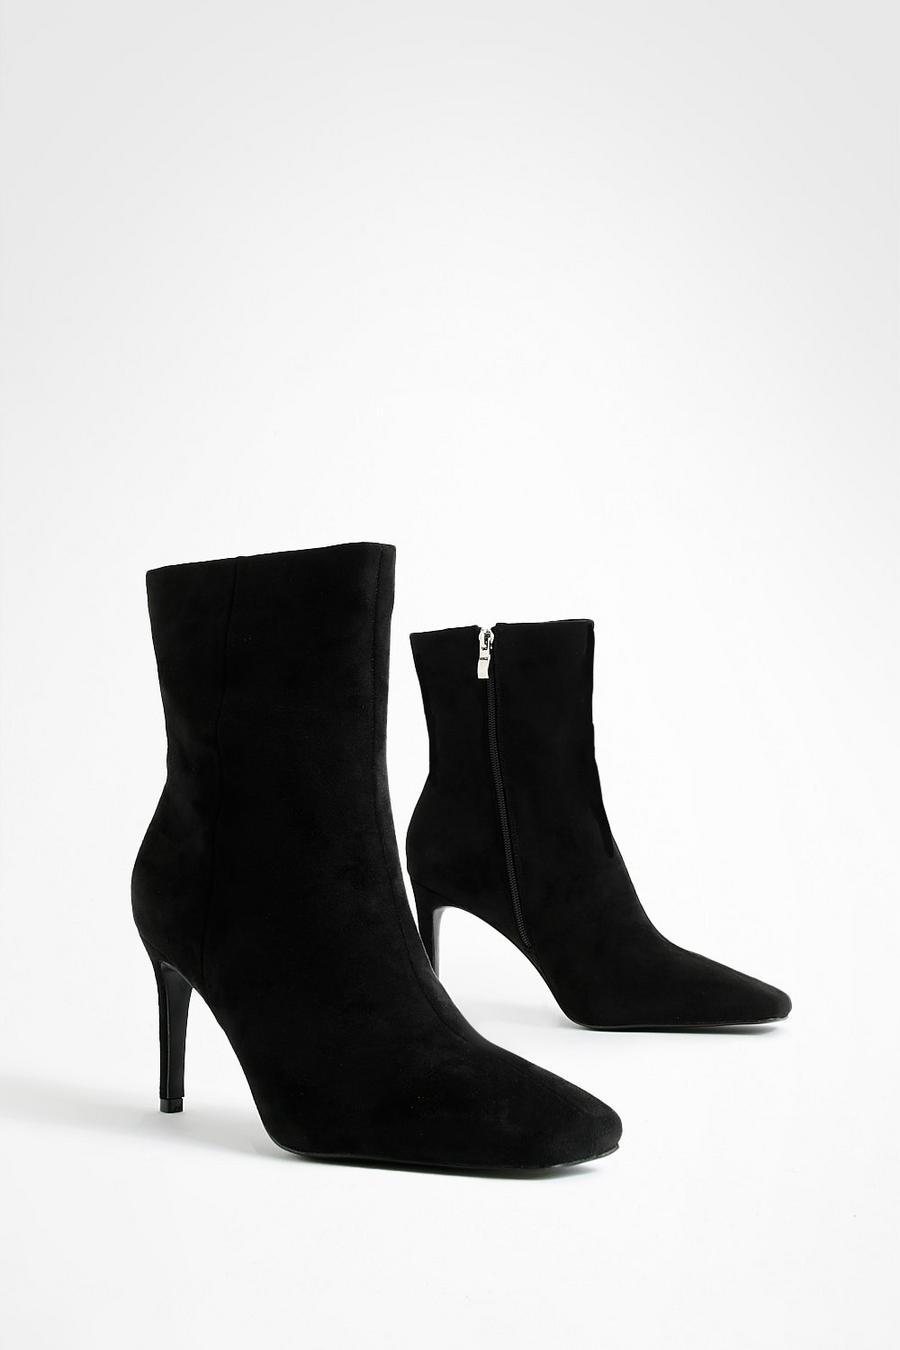 Black Wide Width Square Toe Stiletto Ankle Boots image number 1